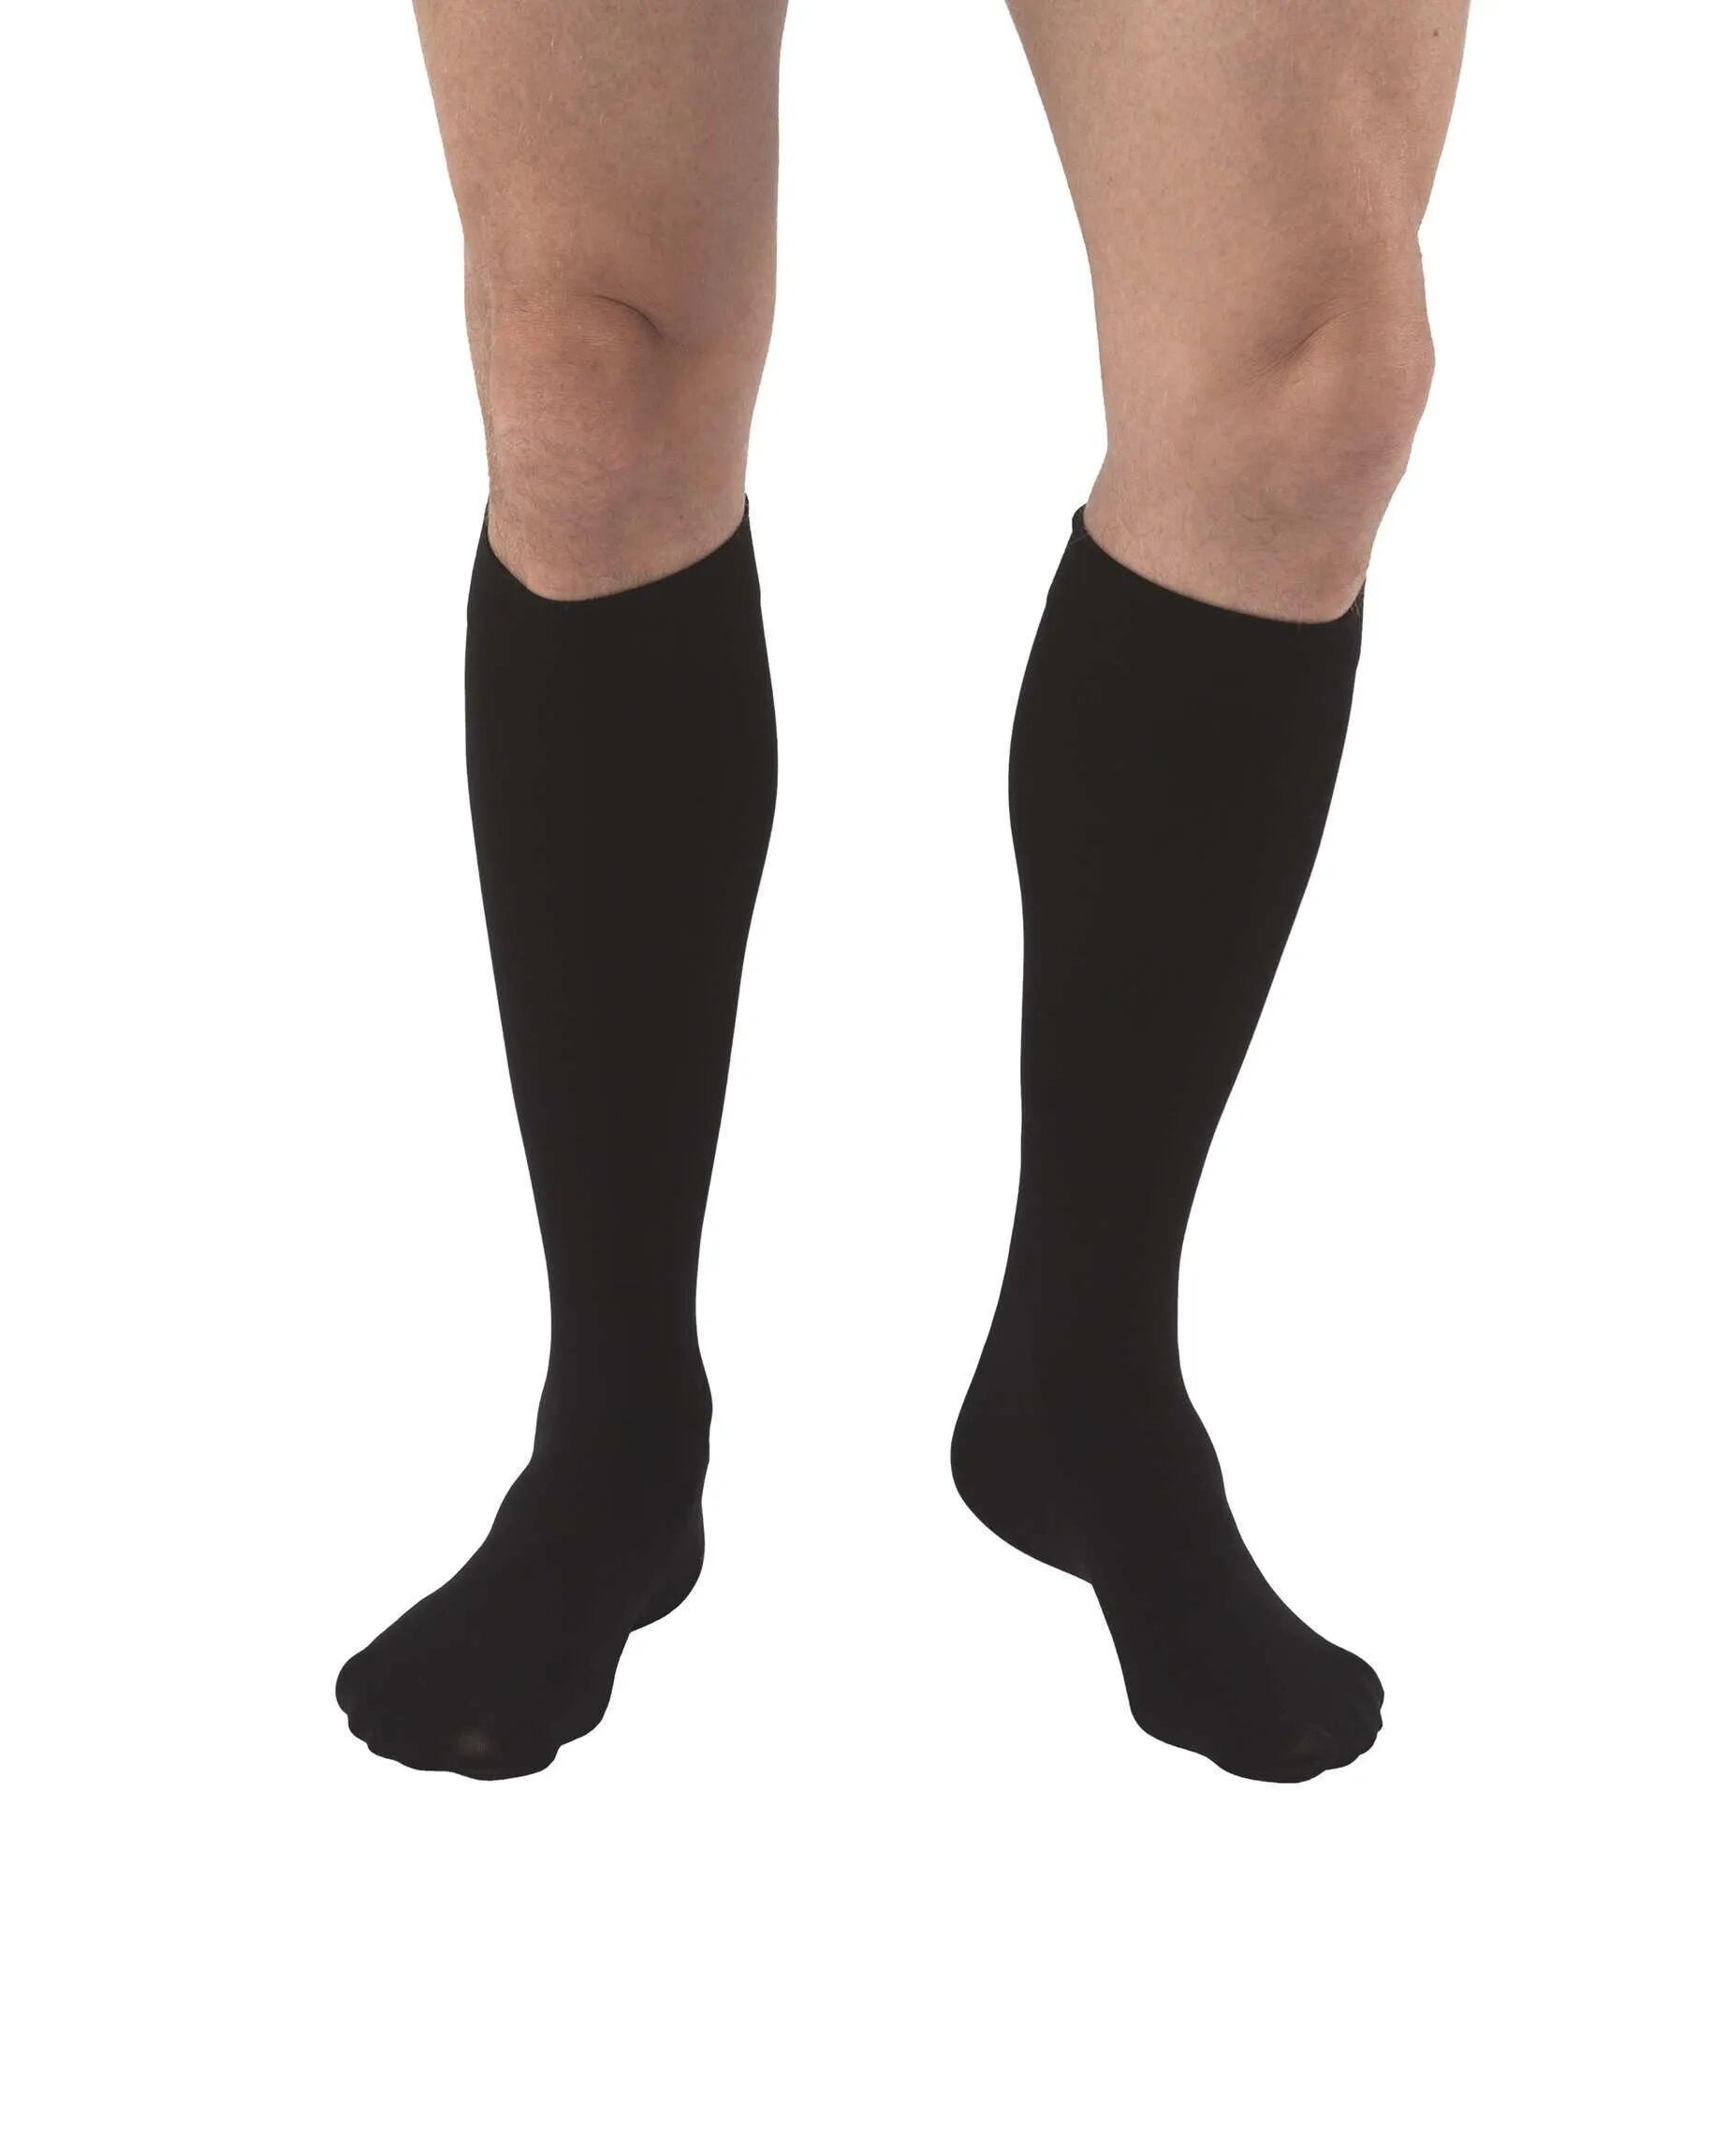 JOBST Relief Compression Stockings 30-40 mmHg Knee High Silicone Dot Band Closed Toe Black Petite Large Full Calf